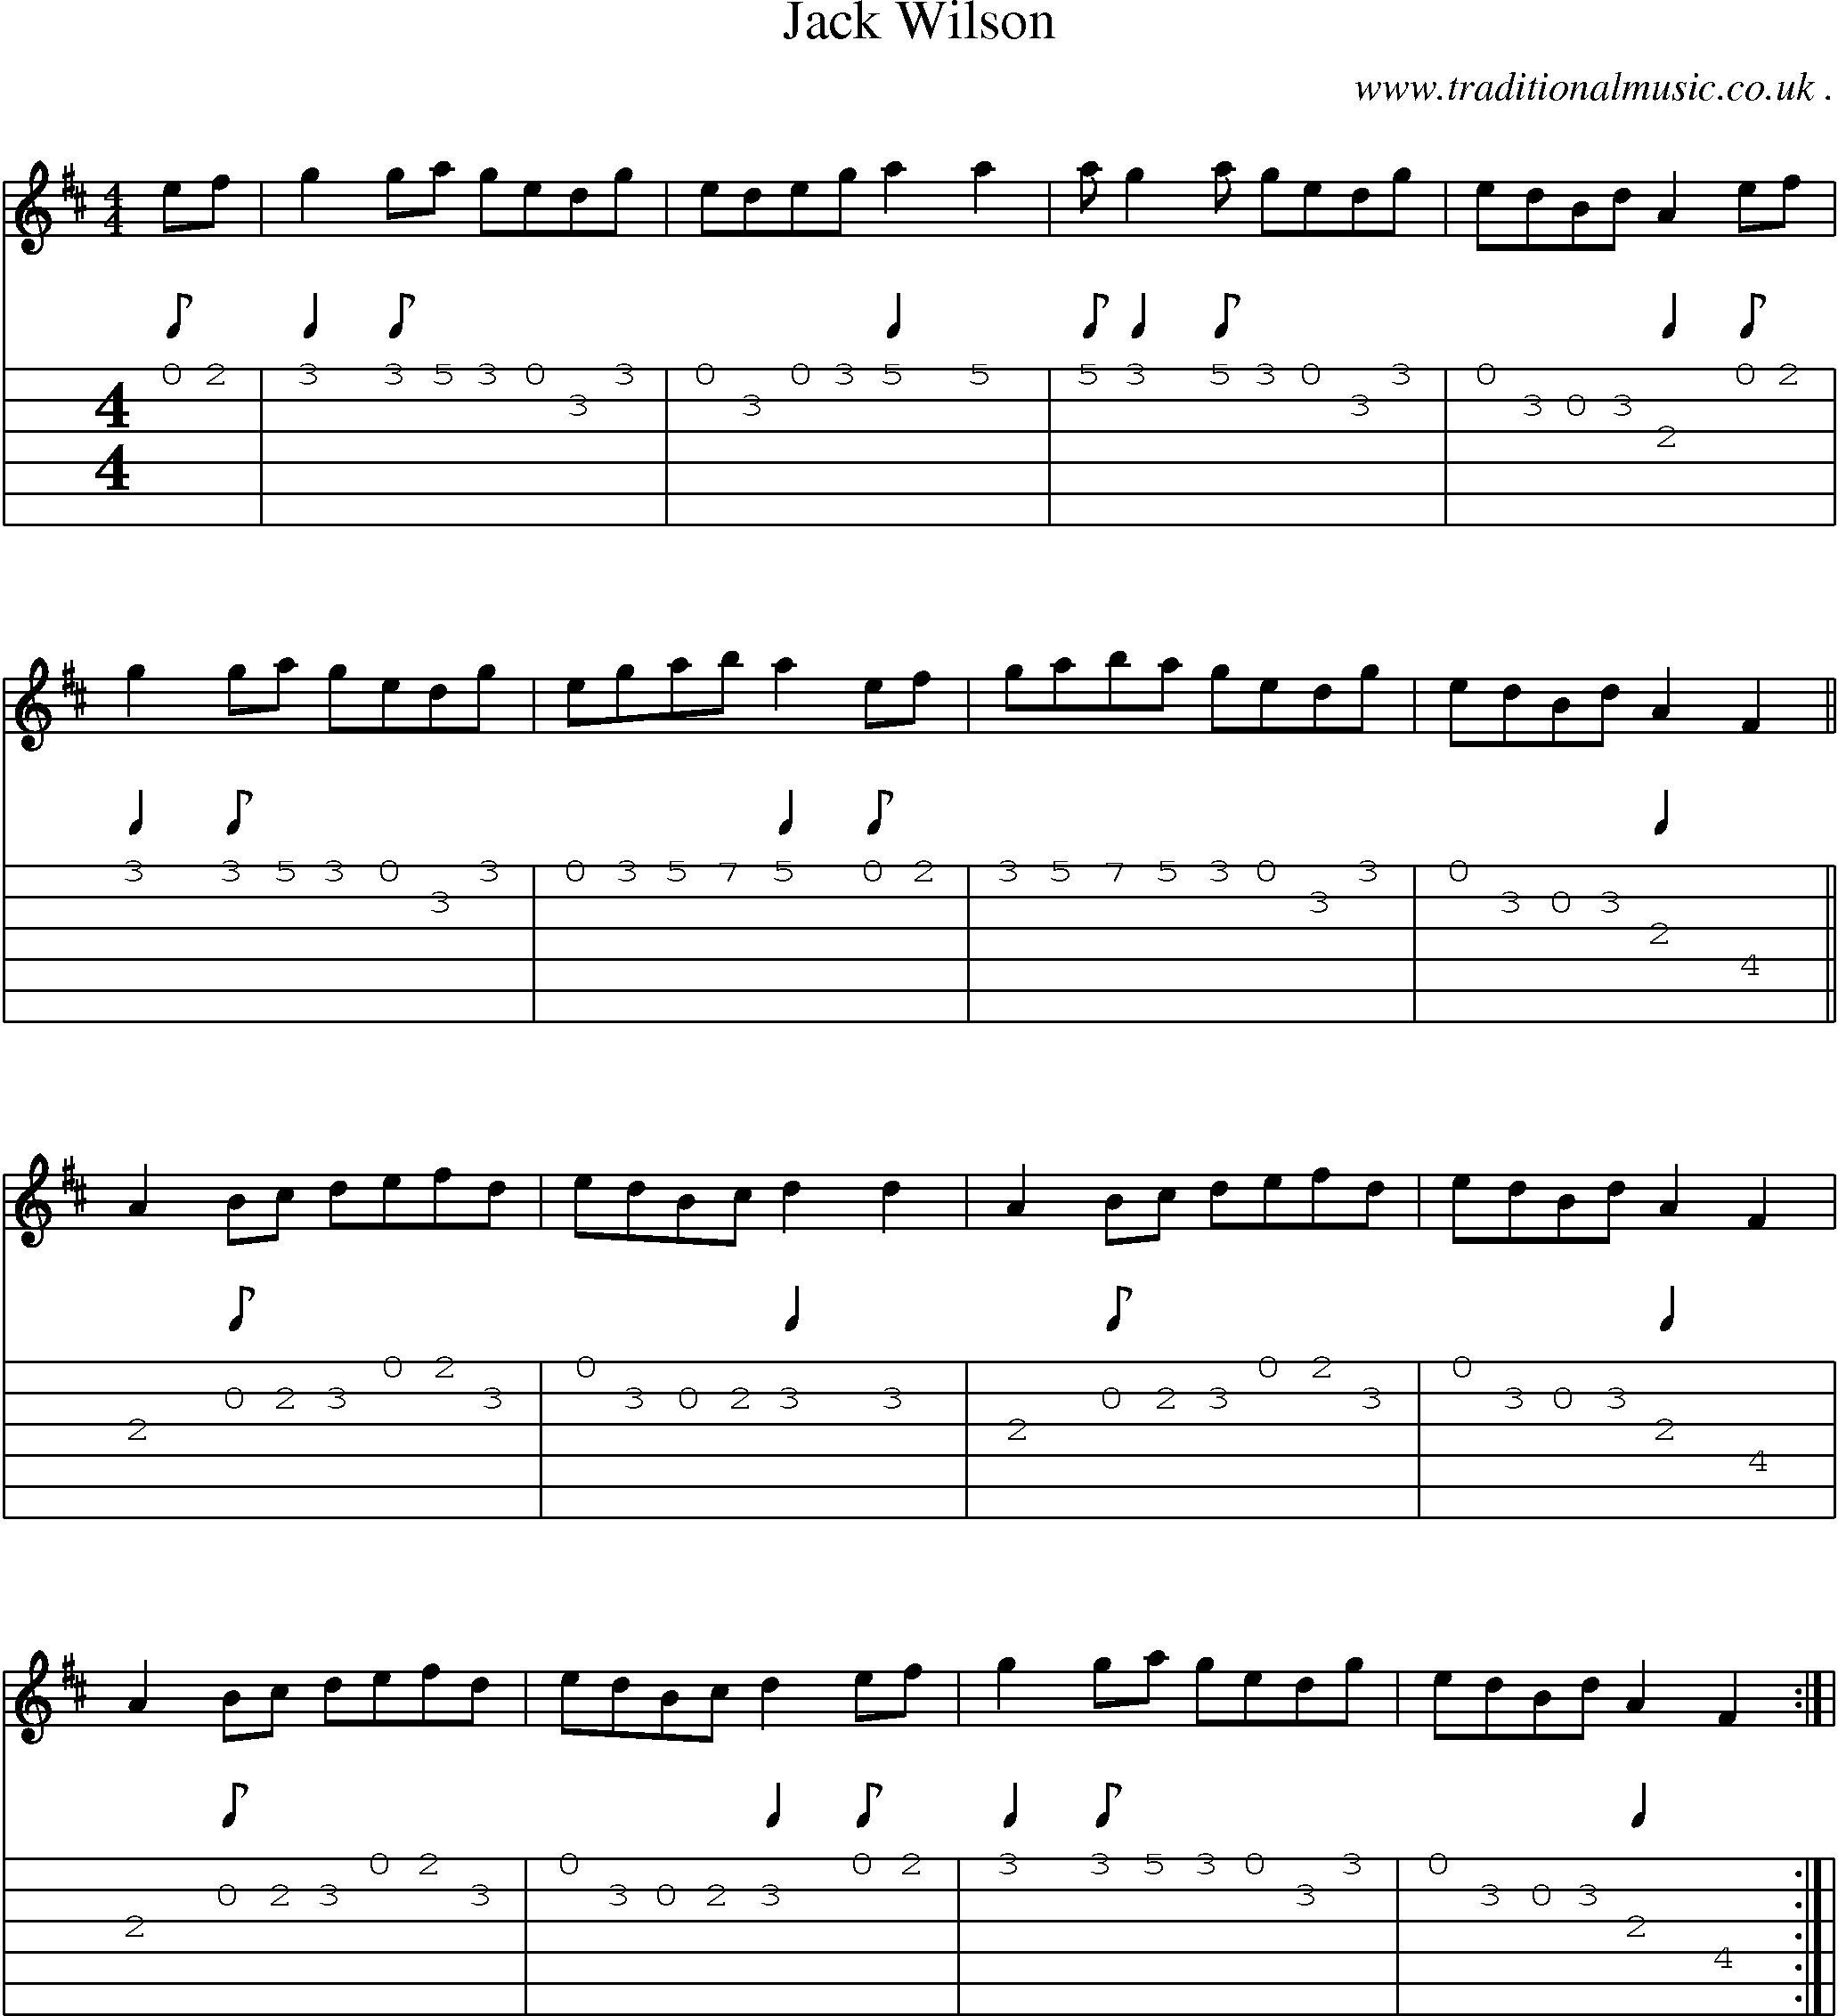 Music Score and Guitar Tabs for Jack Wilson